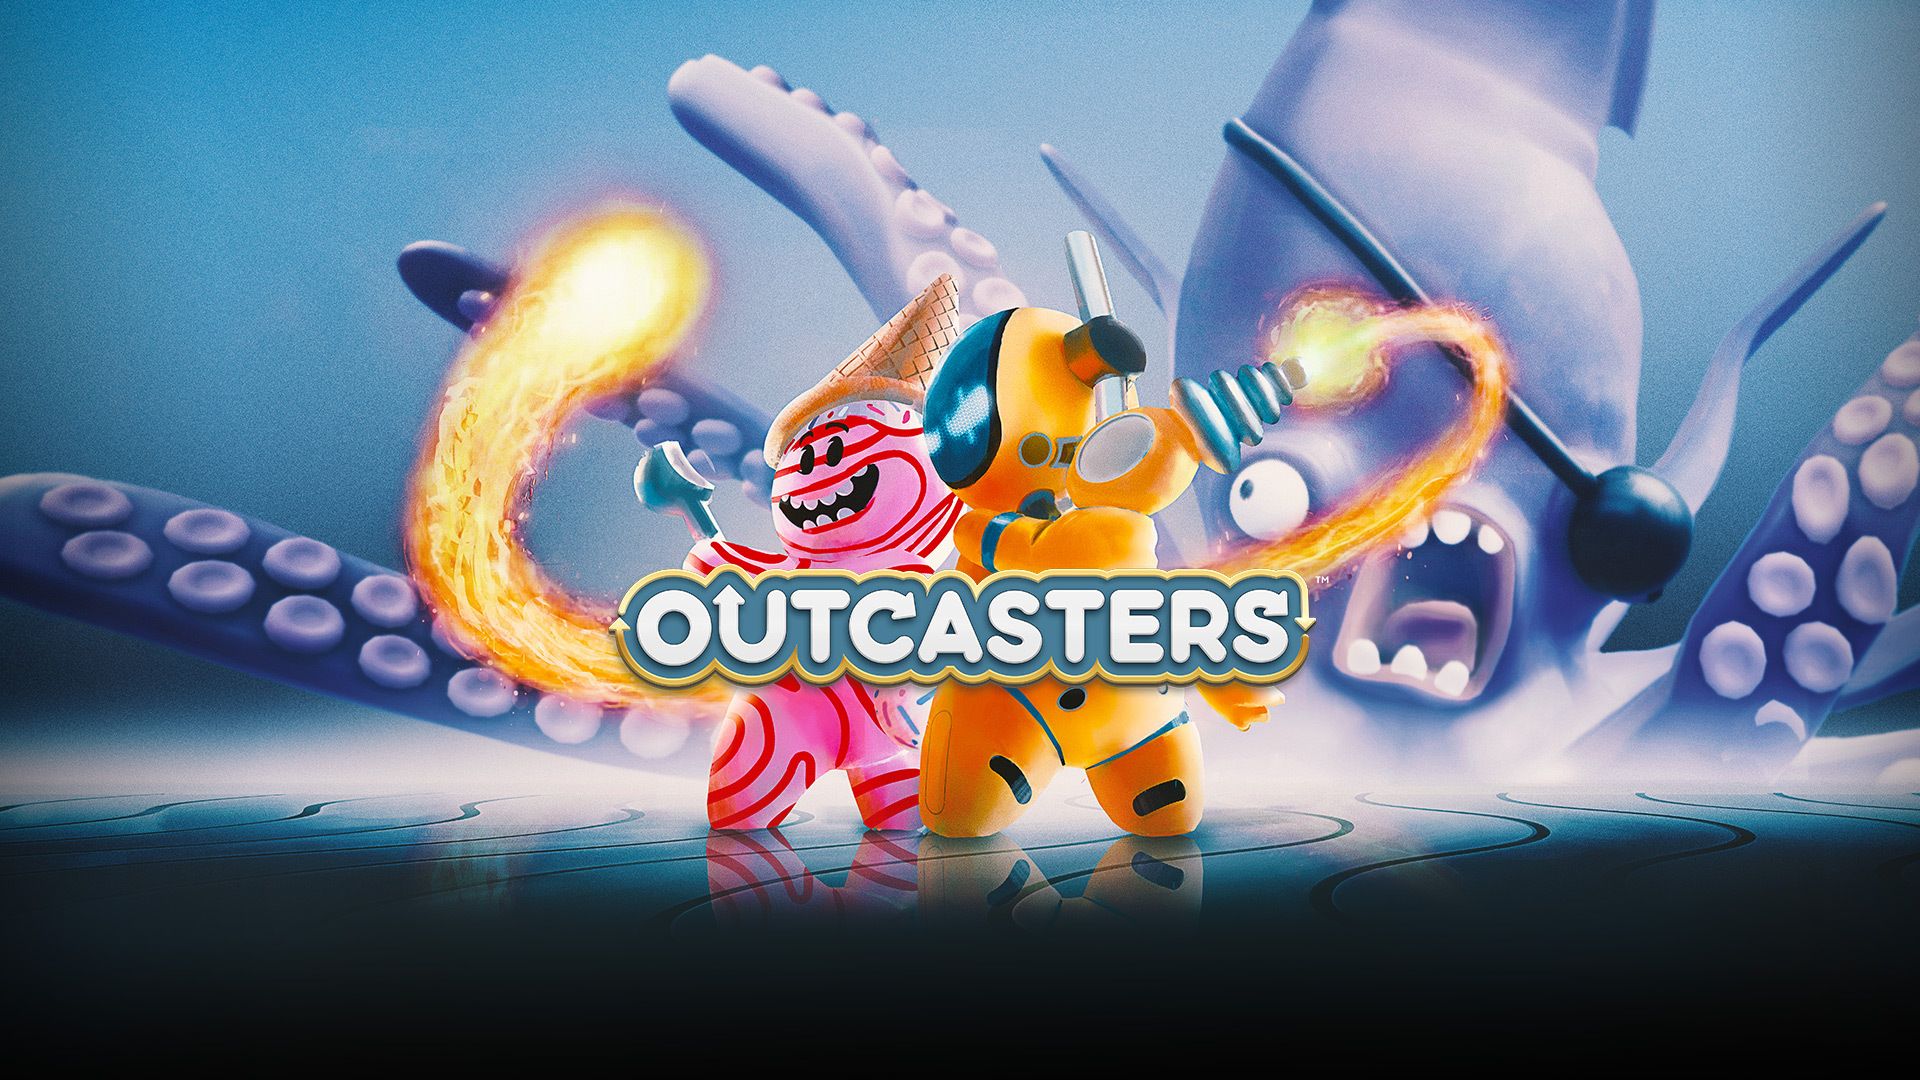 Outcasters can play heroes for free